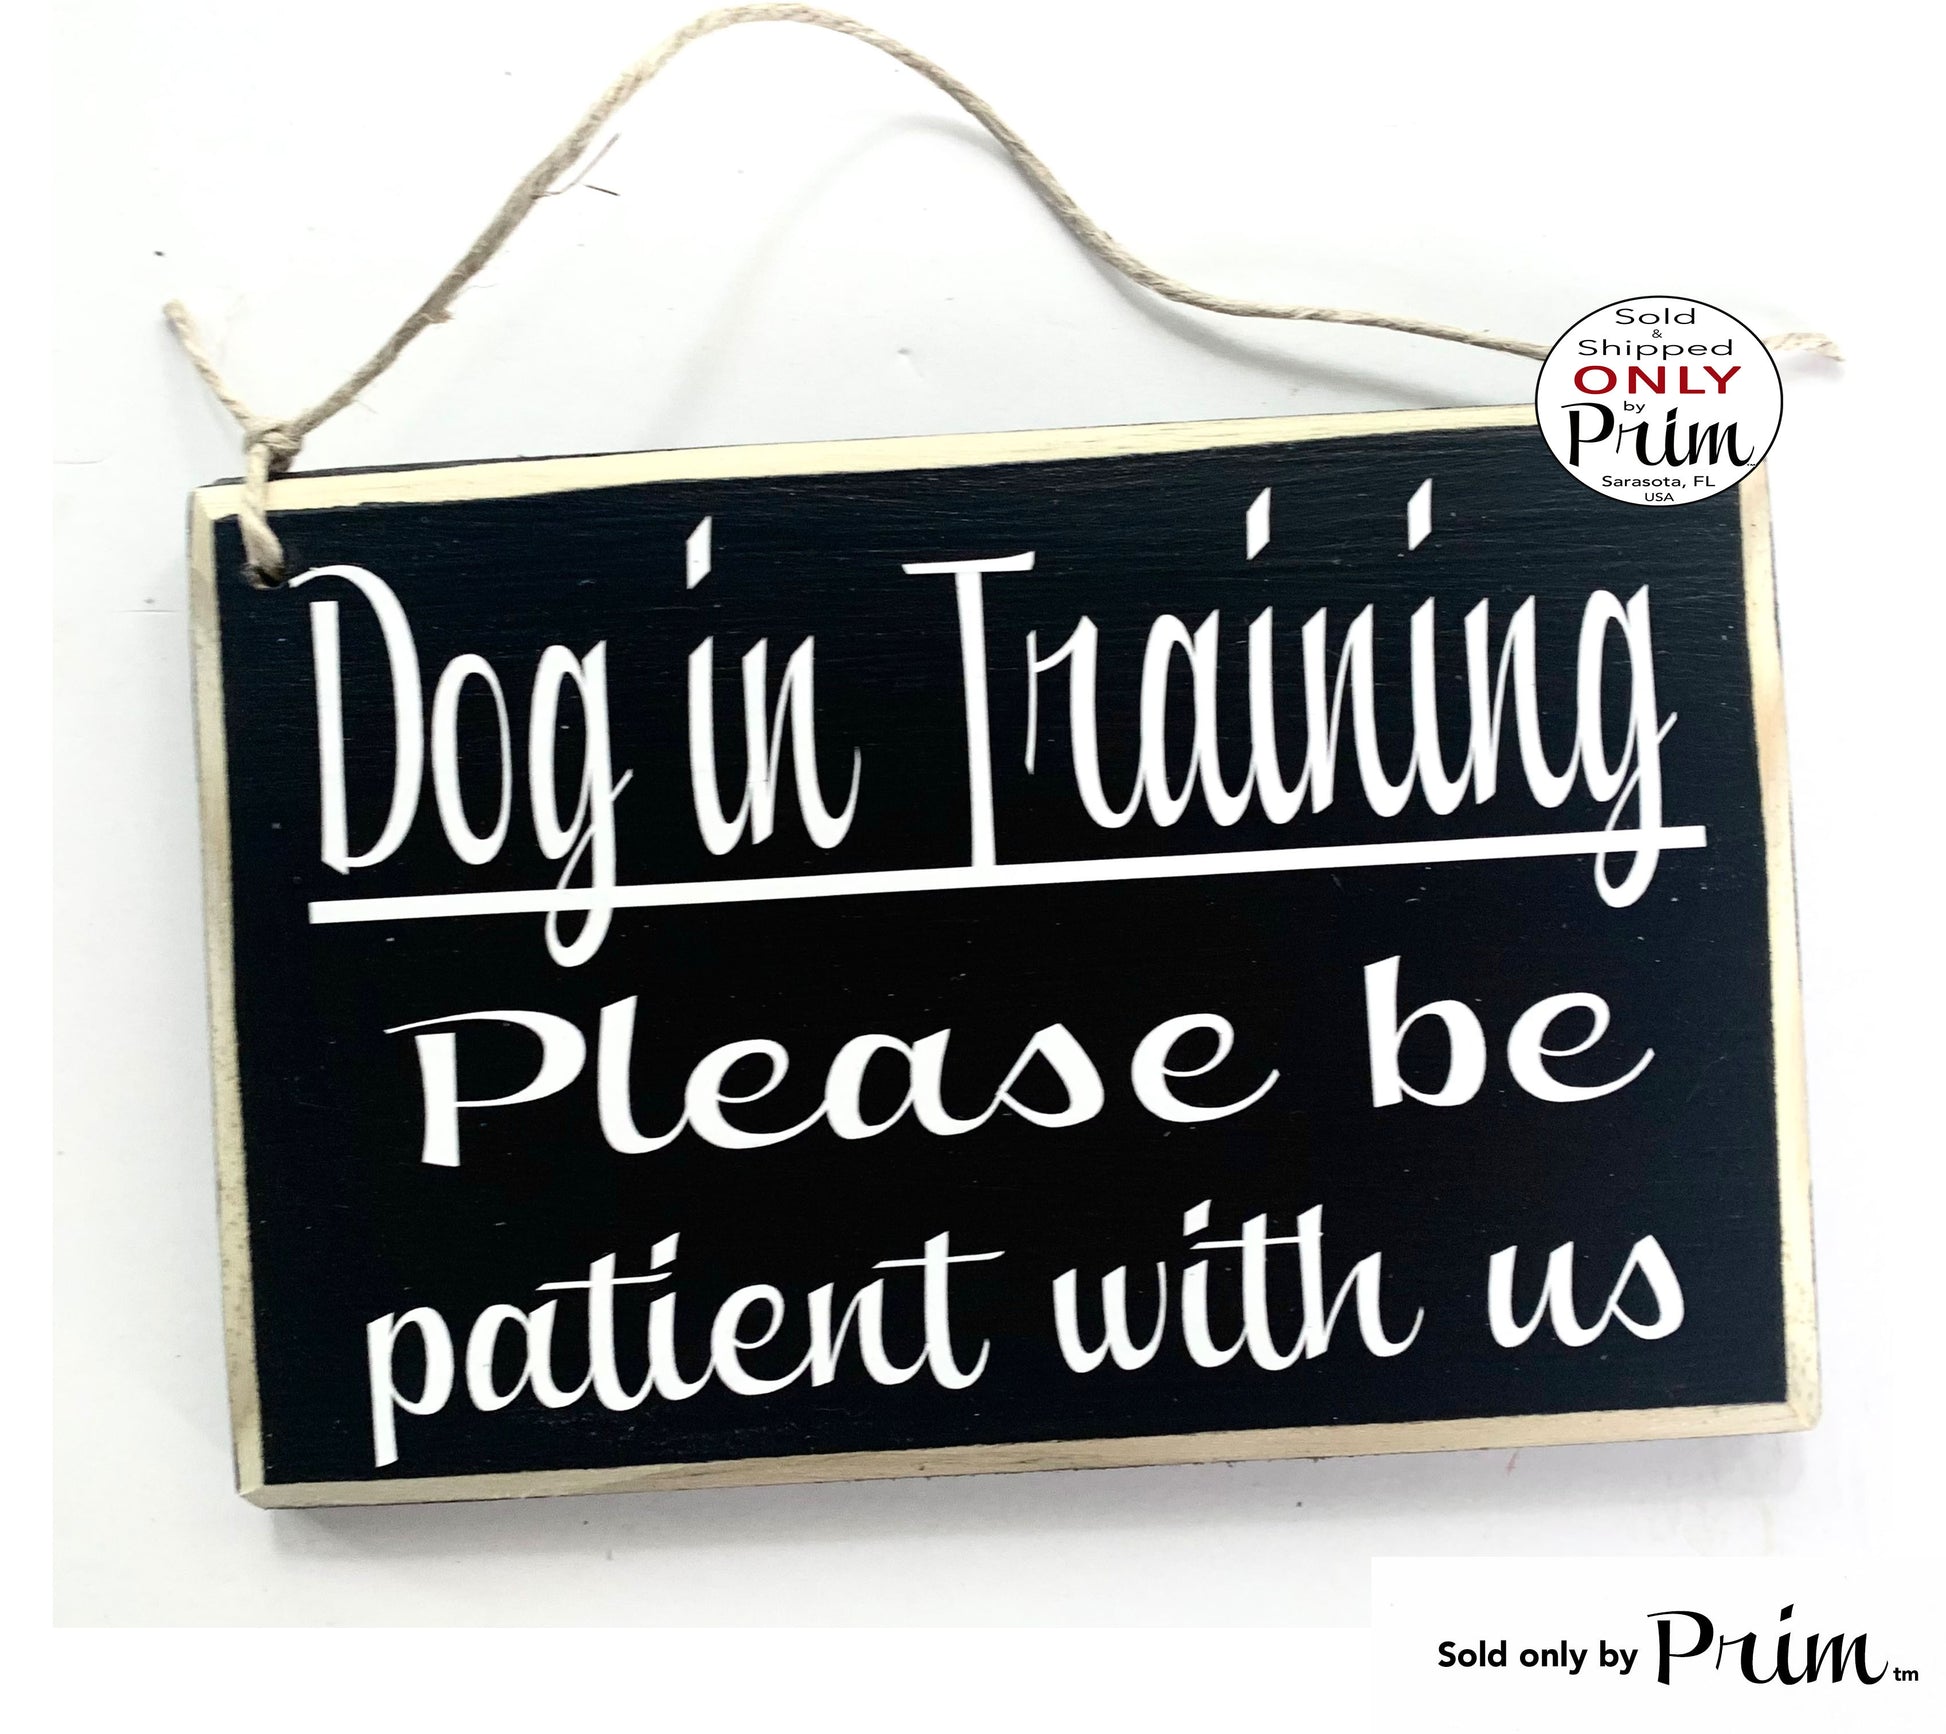 8x6 Dog In Training Please Be Patient With Us Custom Wood Sign Please Do Not Disturb Session K9 School Progress Class Obedience Door Plaque Designs by Prim